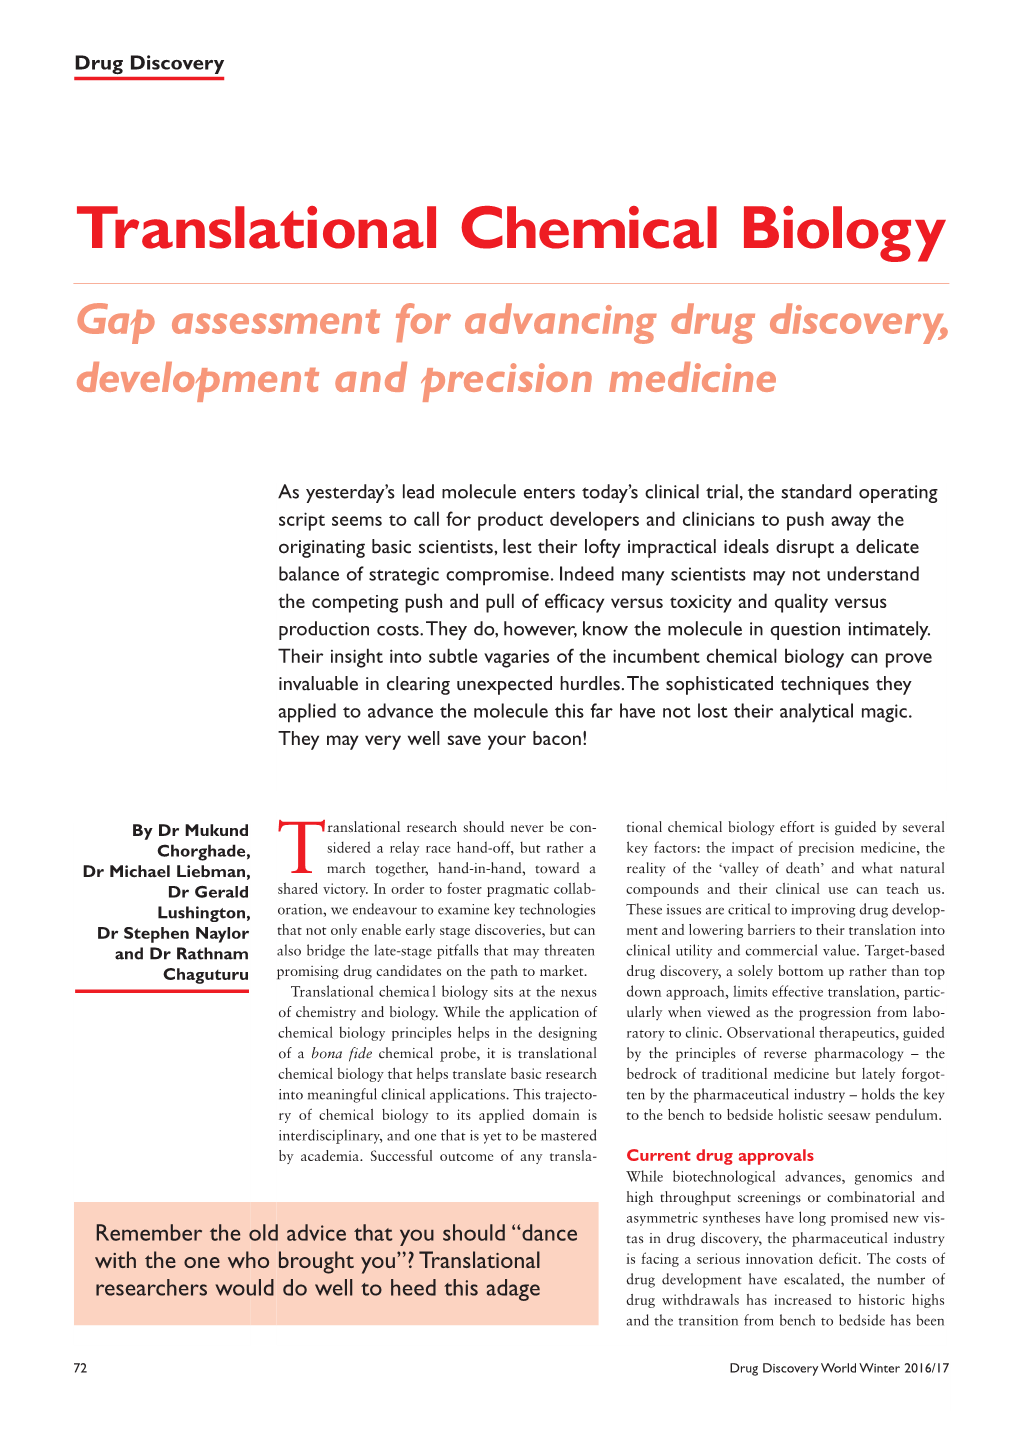 Translational Chemical Biology Gap Assessment for Advancing Drug Discovery, Development and Precision Medicine